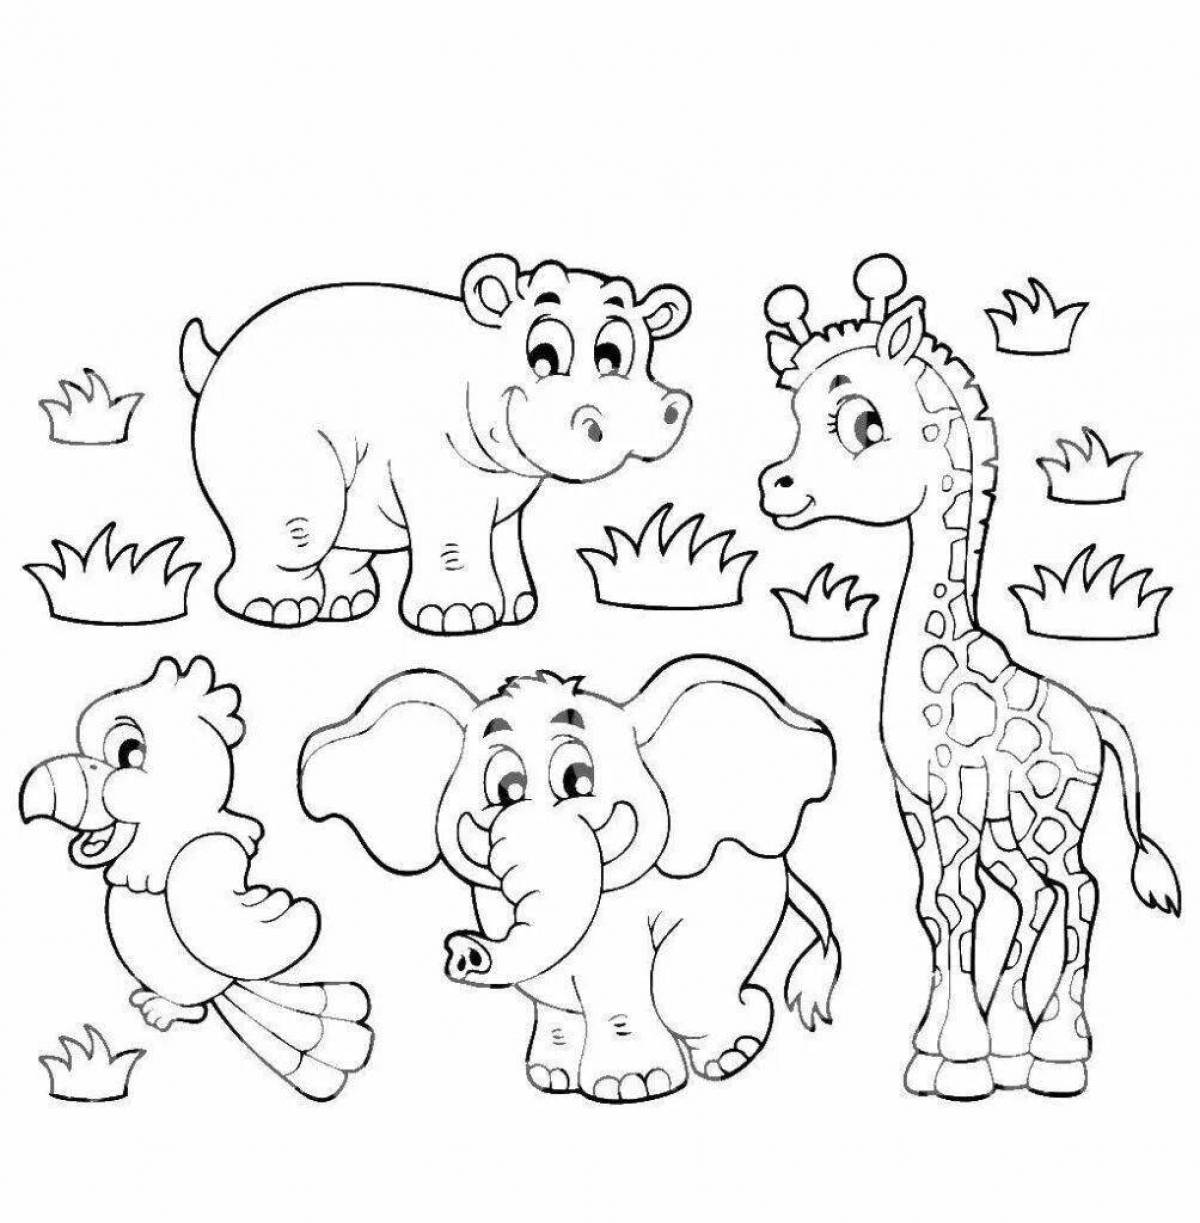 Colouring animals of cold countries for preschoolers